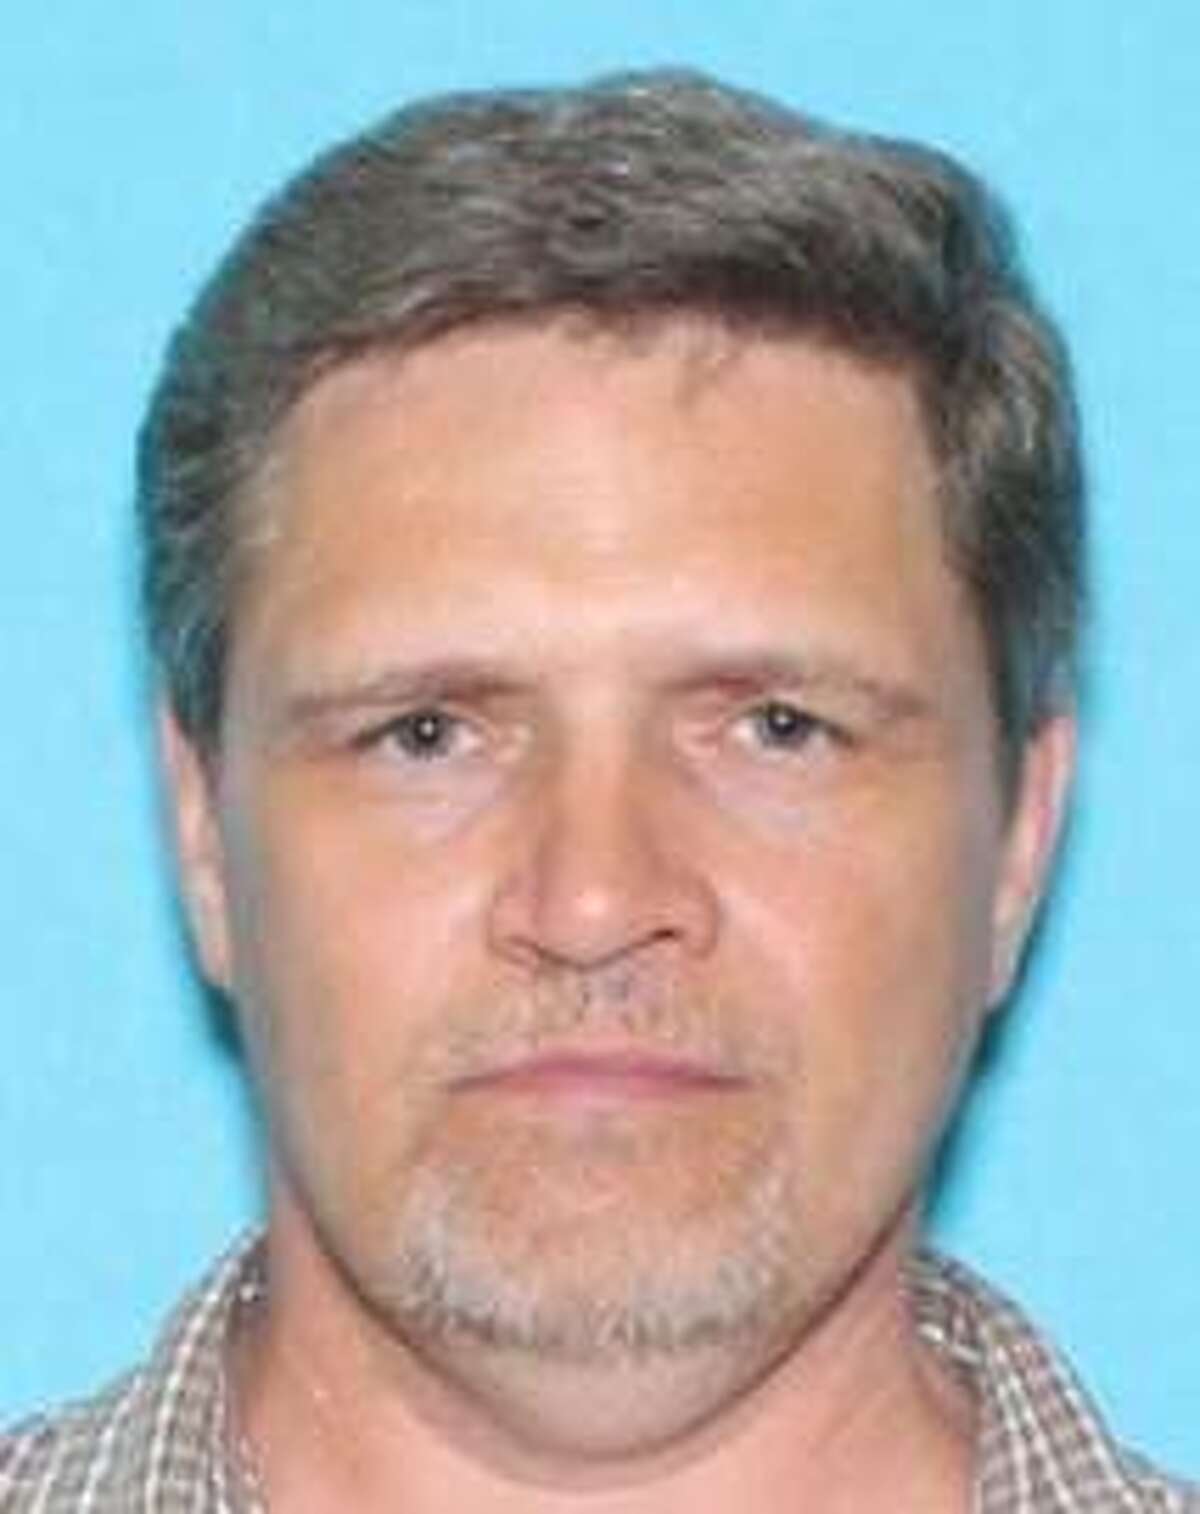 The Texas Department of Public Safety (DPS) has added Ernest Leroy Smith, 46, to the Texas 10 Most Wanted Fugitives list, and a cash reward up to $7,500 is now being offered for information leading to his capture. Smith, who is a sexually violent predator, removed his ankle monitor on Thursday and fled from a Houston halfway house. He is wanted for parole violation and is considered at high risk to reoffend.